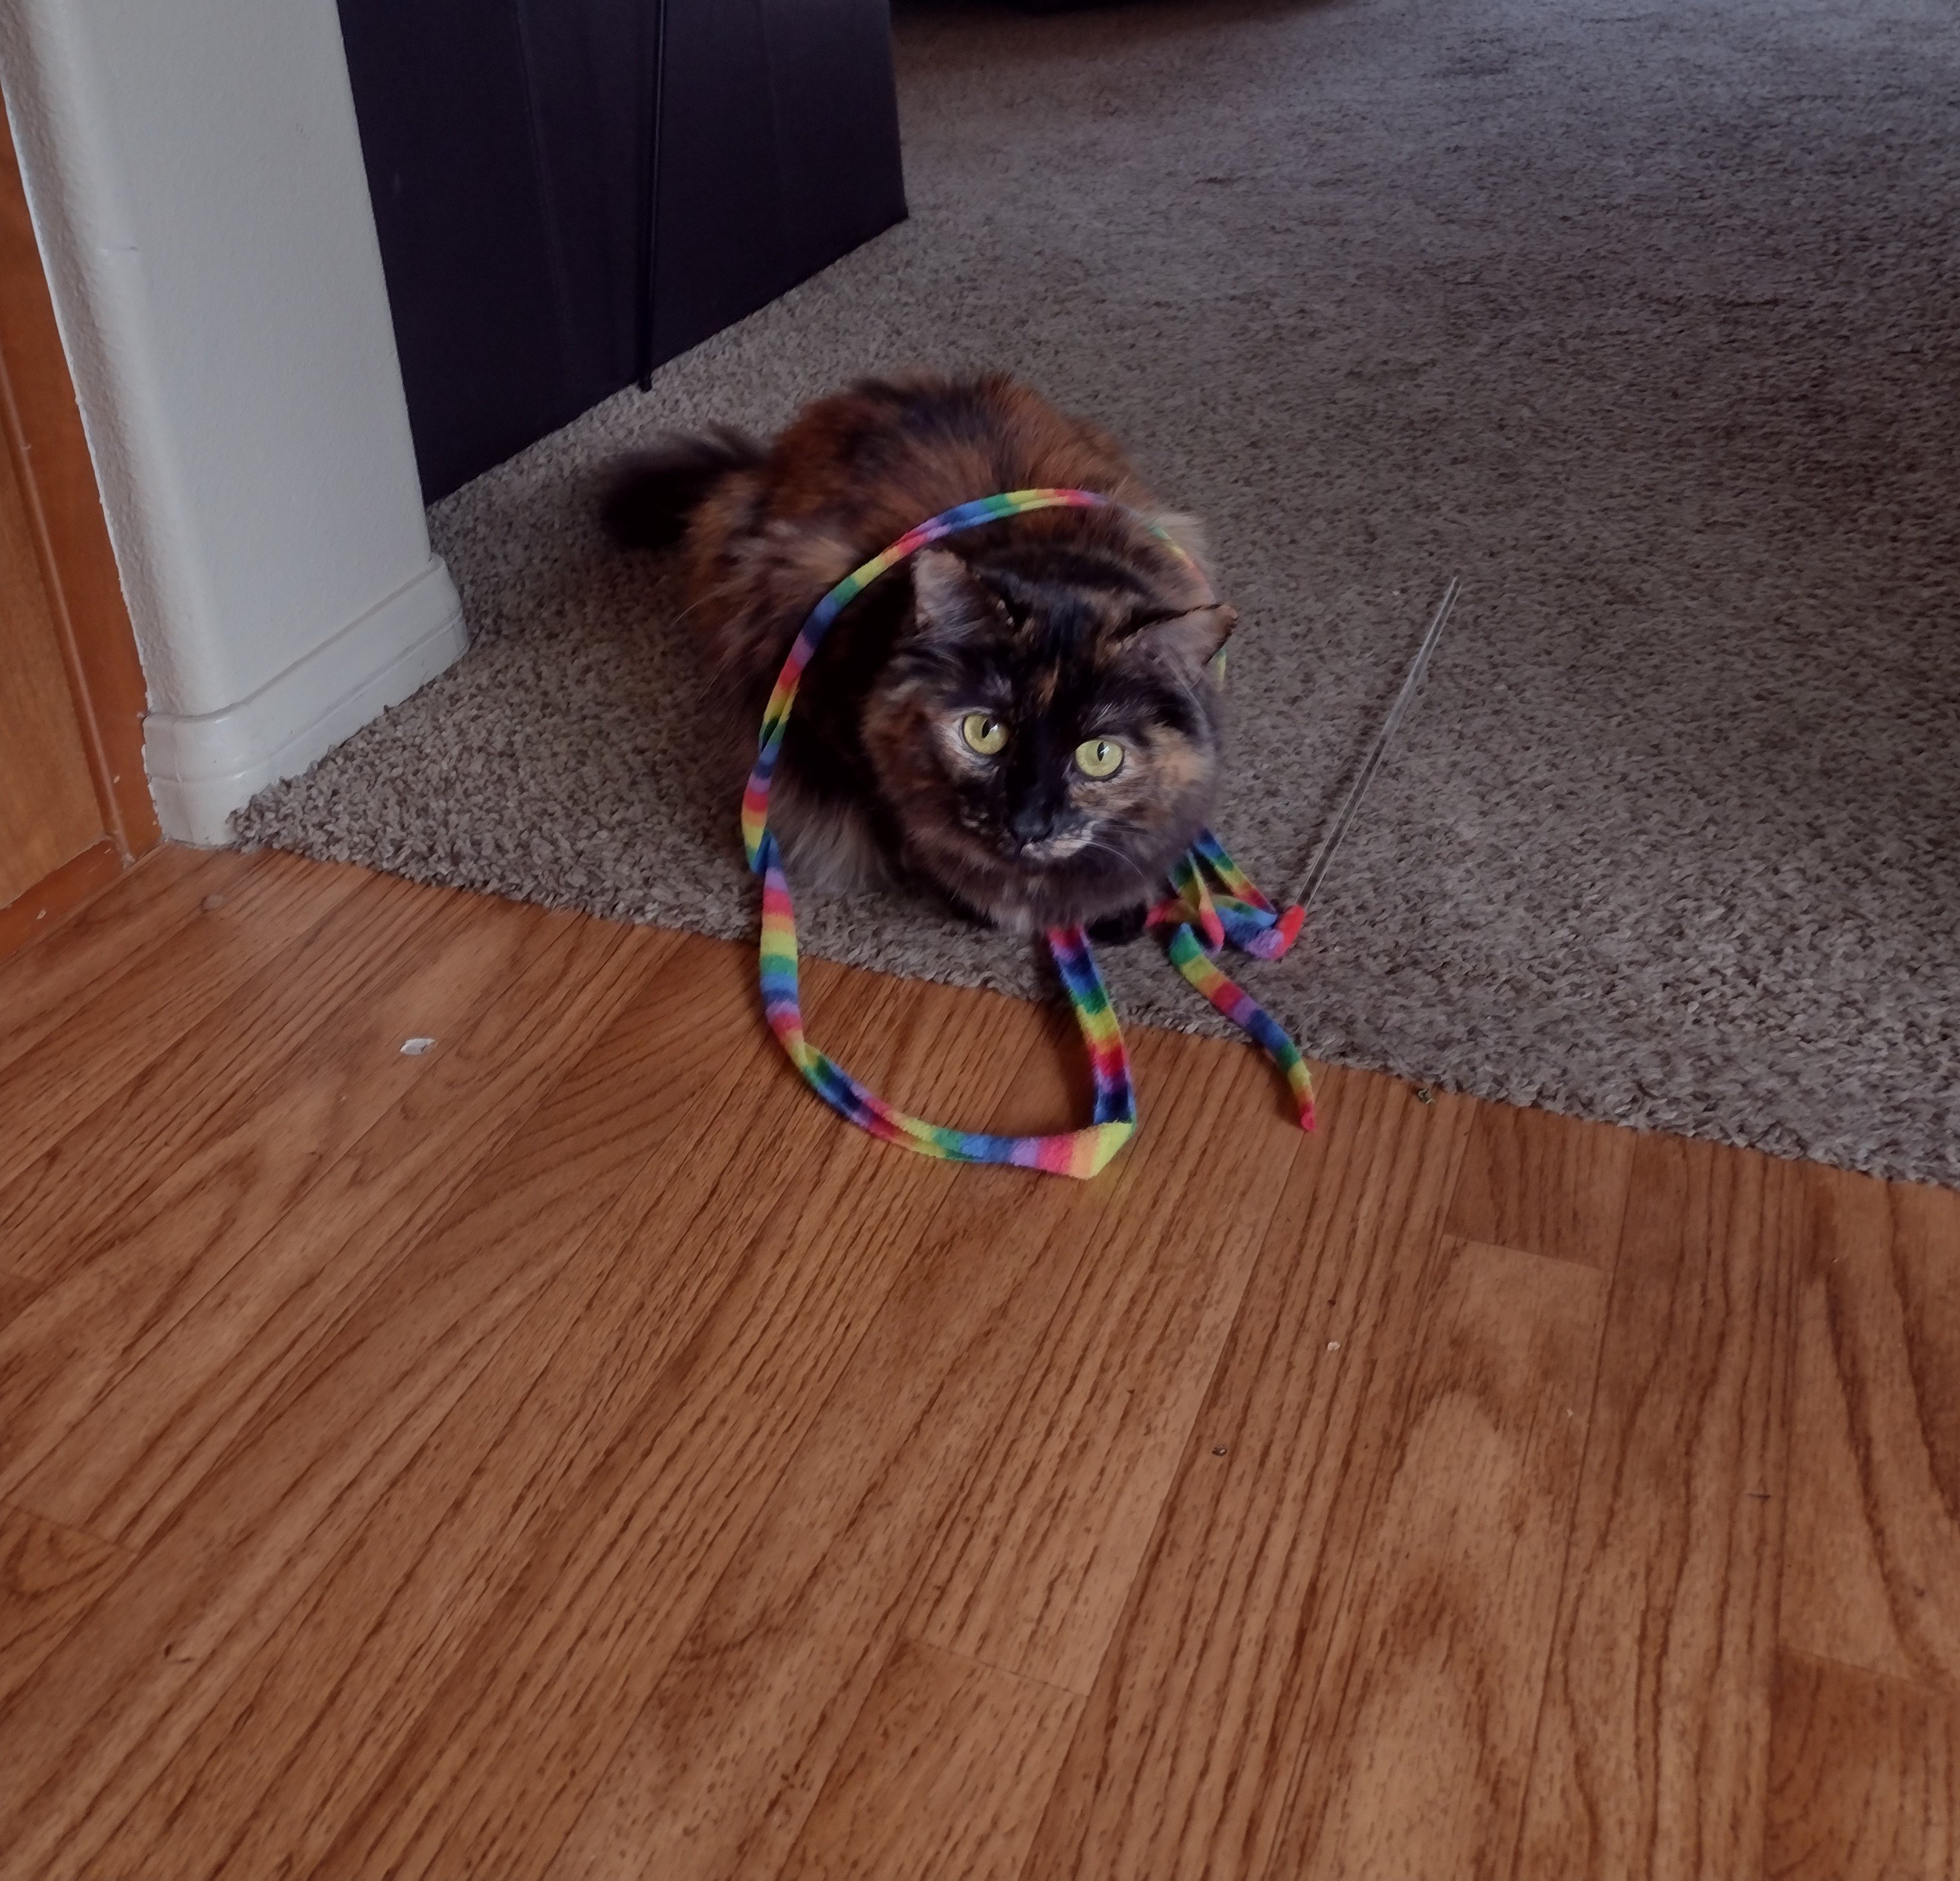 Cinnamon likes to wear the toys